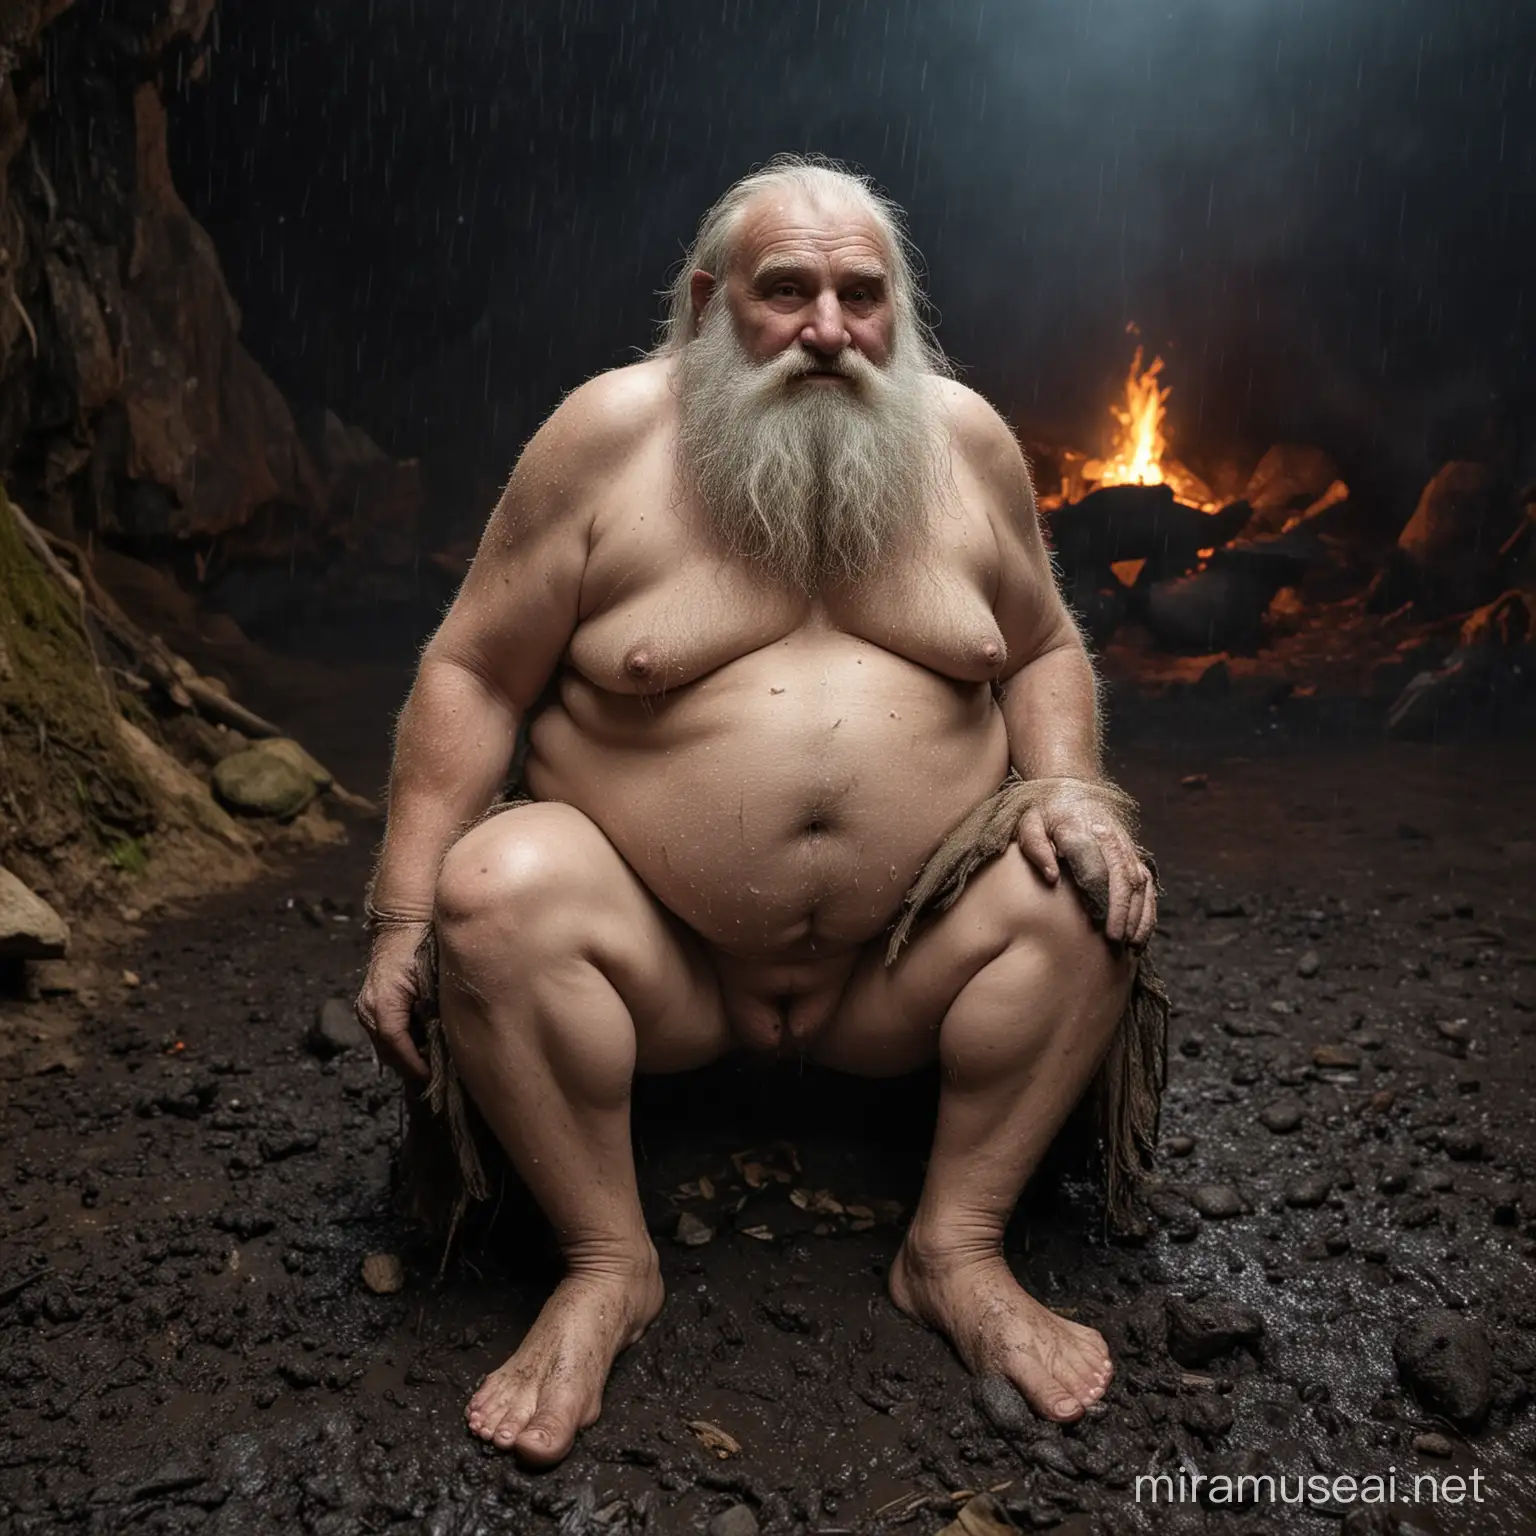 Old Troll Sitting by Midnight Bonfire in Forest Cave